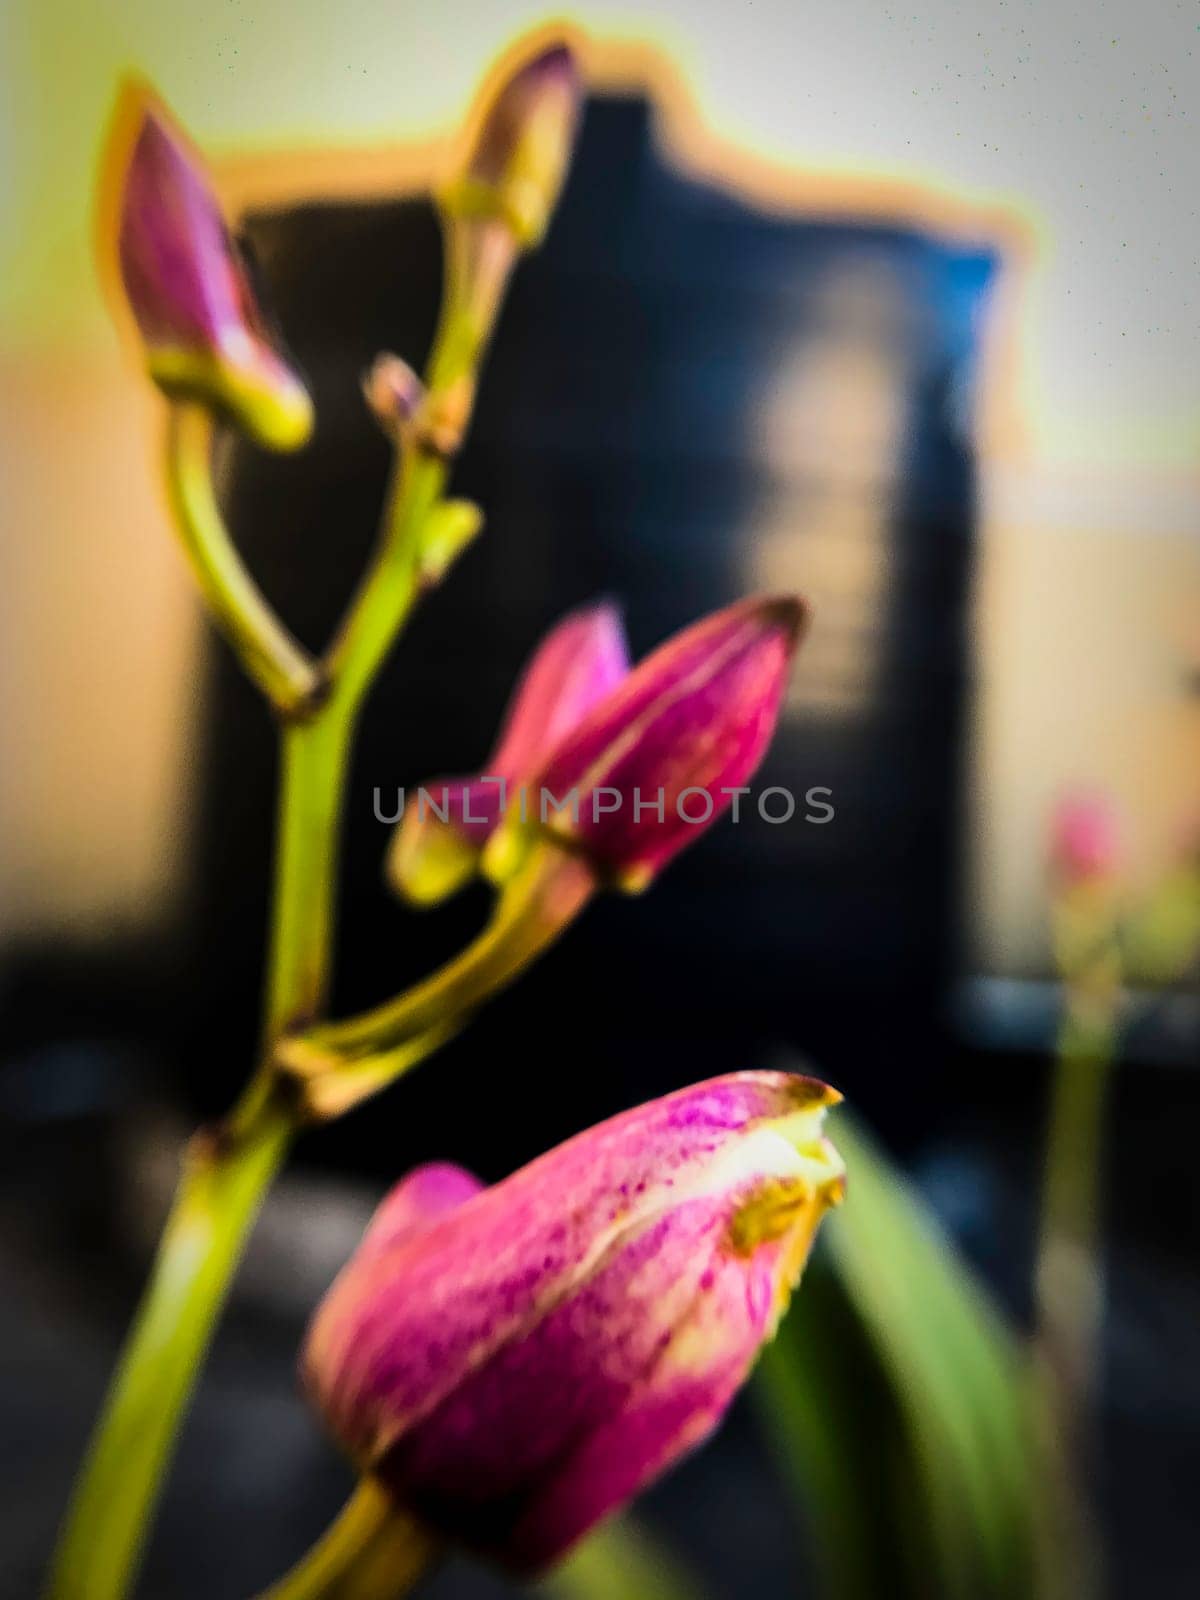 The image features vibrant purple orchid flowers with vibrant petals, standing out against a blurred background. The flower, positioned in the foreground, is the main subject and is sharply focused, creating a stunning contrast. Check out my other portfolios by following the link- https://linktr.ee/apurv123. High-quality photo